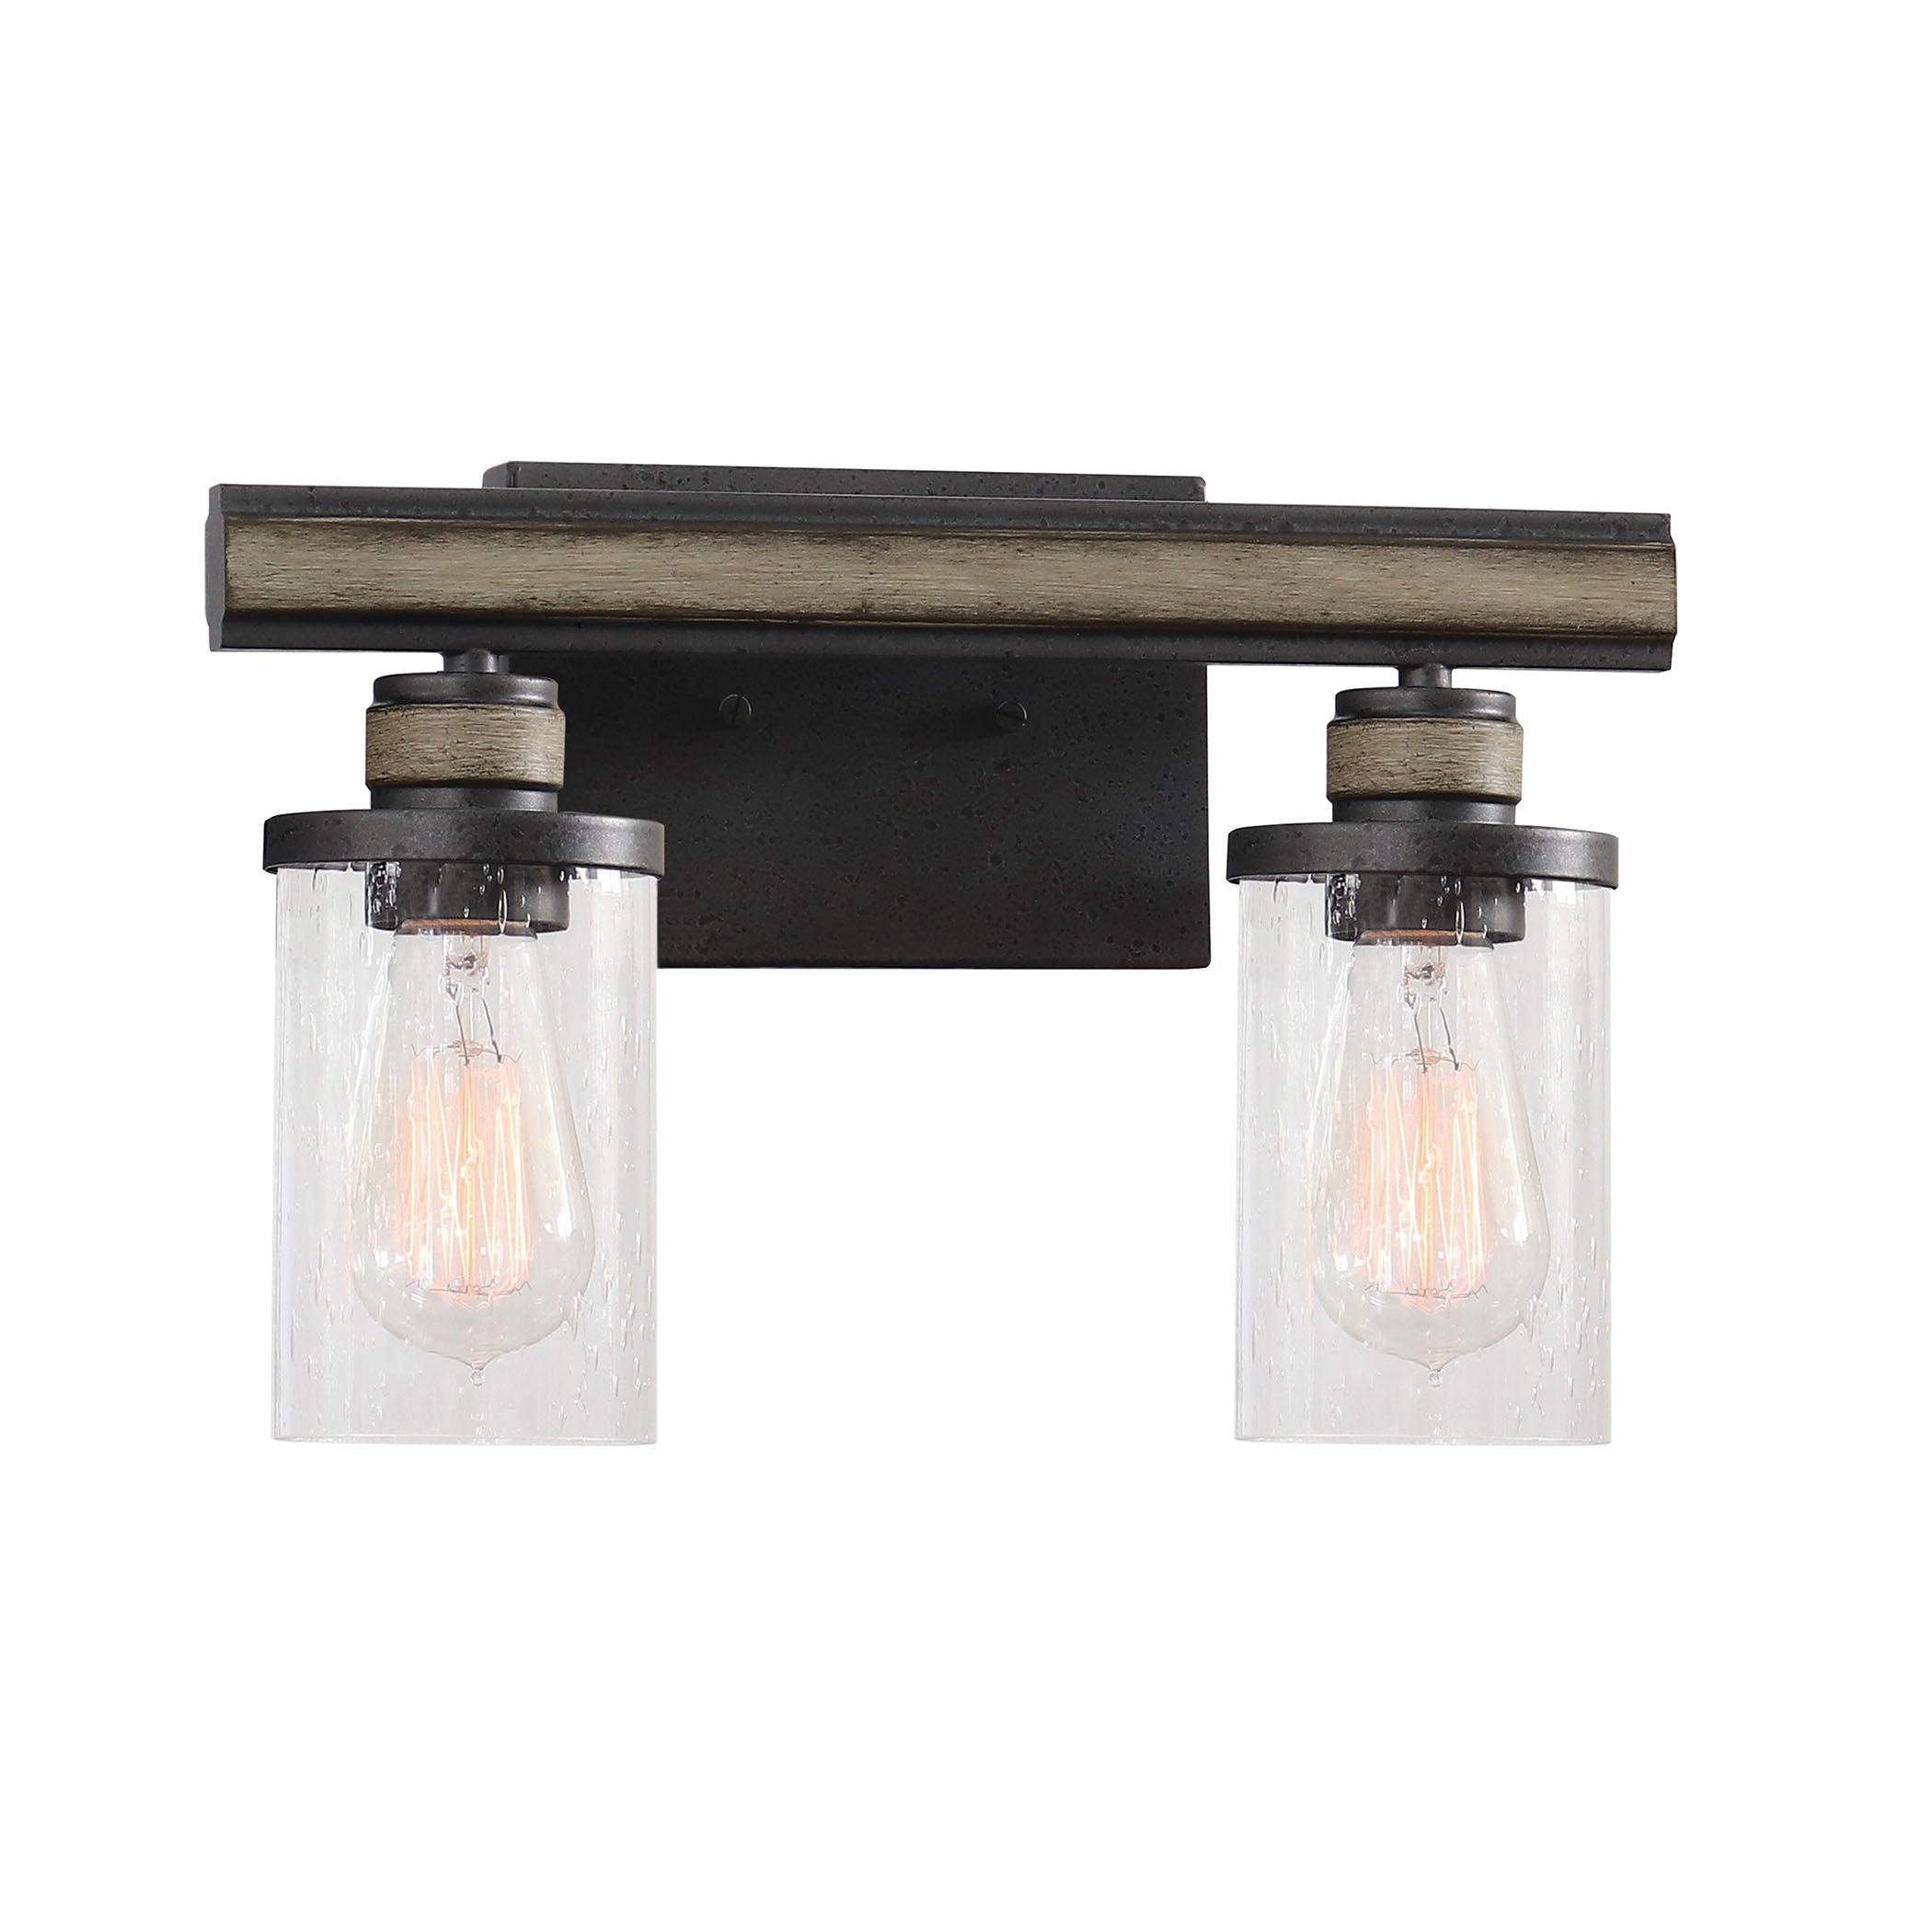 ELK Lighting 89153/2 Beaufort 2-Light Vanity Light in Anvil Iron and Distressed Antique Graywood with Seedy Glass